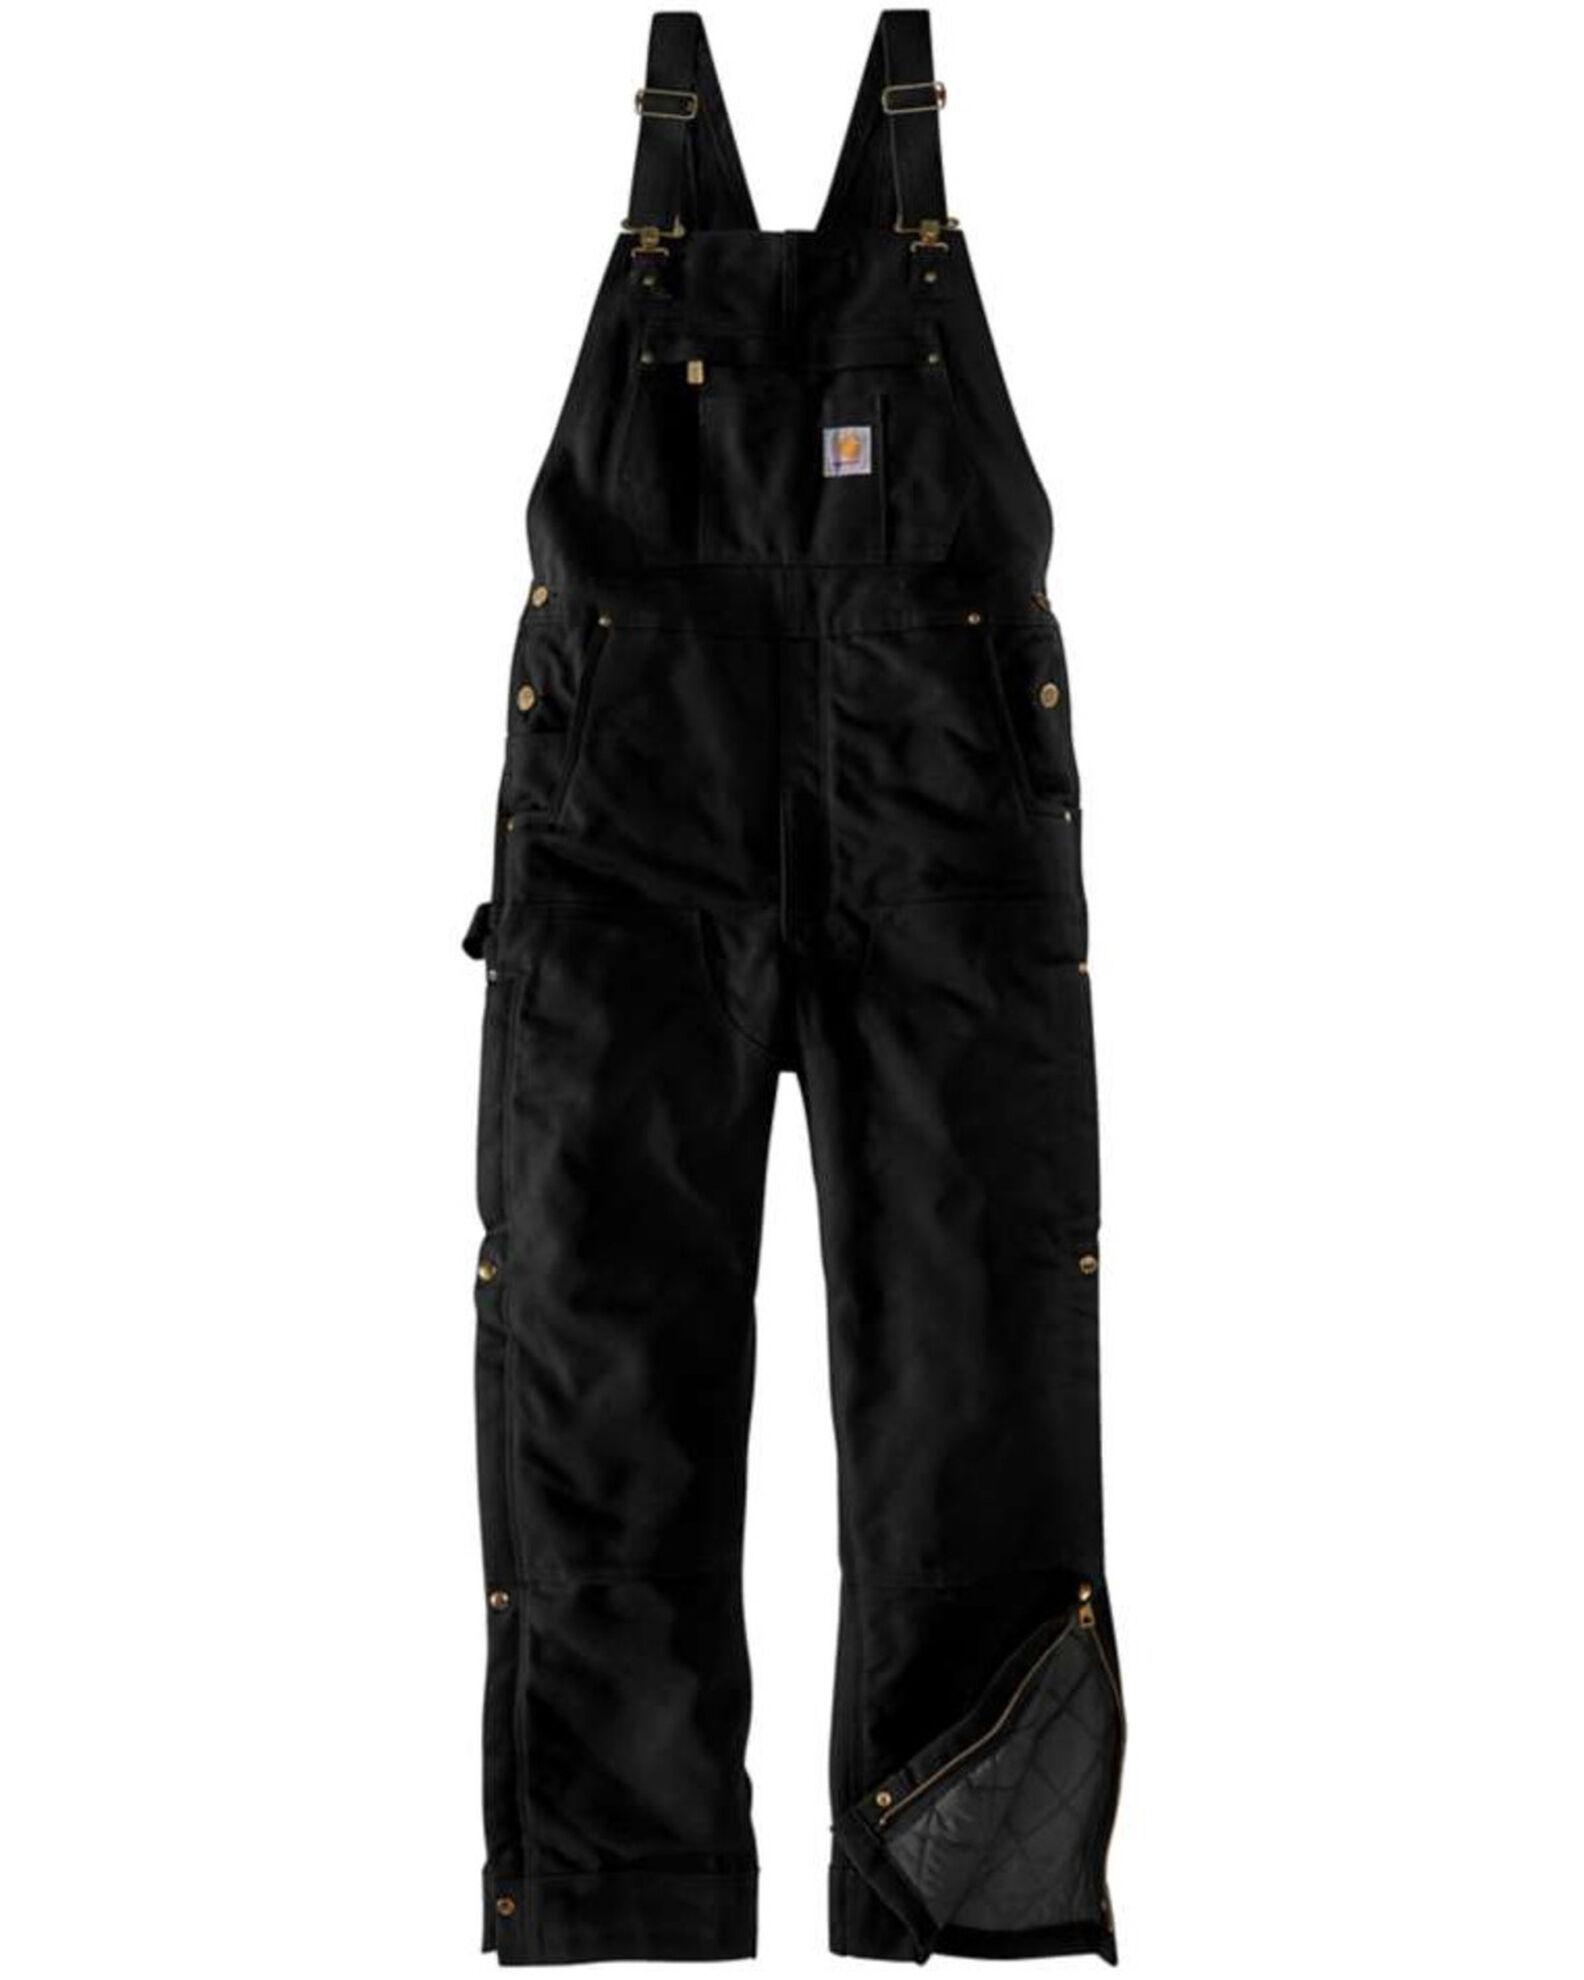 Carhartt Loose Fit Firm Duck Insulated Bib Overall Black 2XL